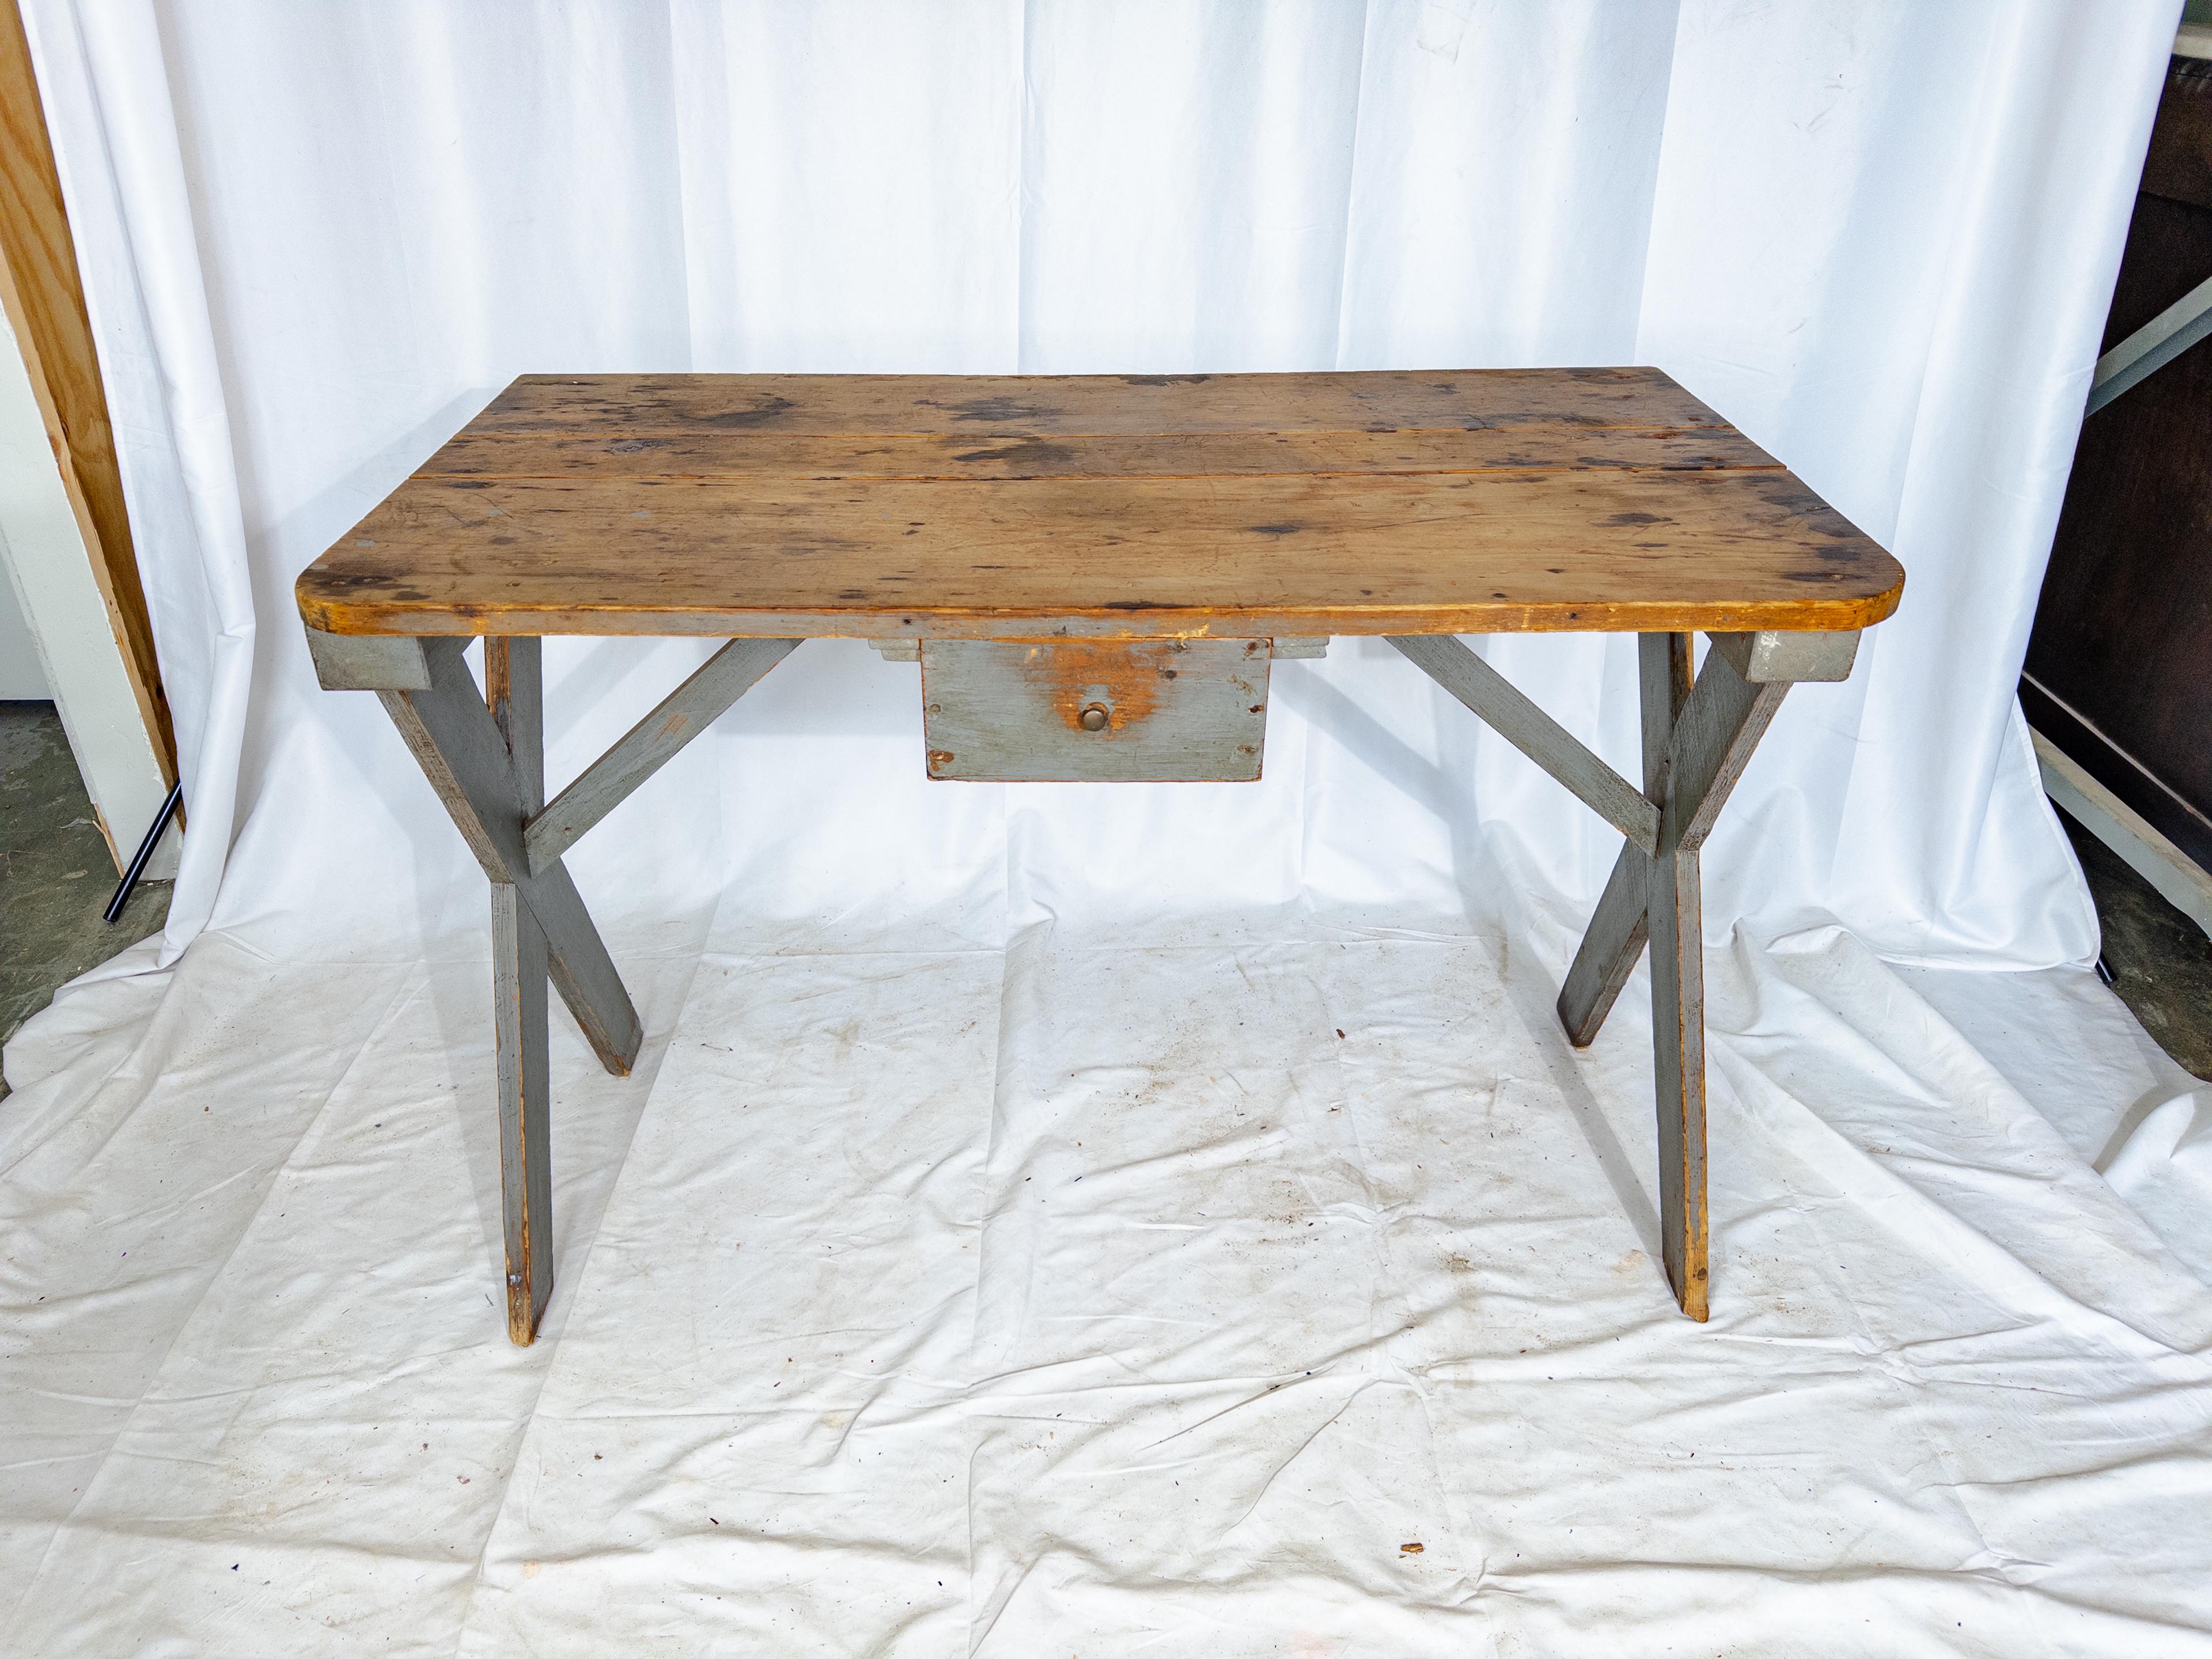 This early 20th-century Swedish farm table is a testament to simplicity and functionality, exuding rustic charm with its understated elegance. Crafted from sturdy wood, its table body wears a serene coat of blue-gray paint, reminiscent of the